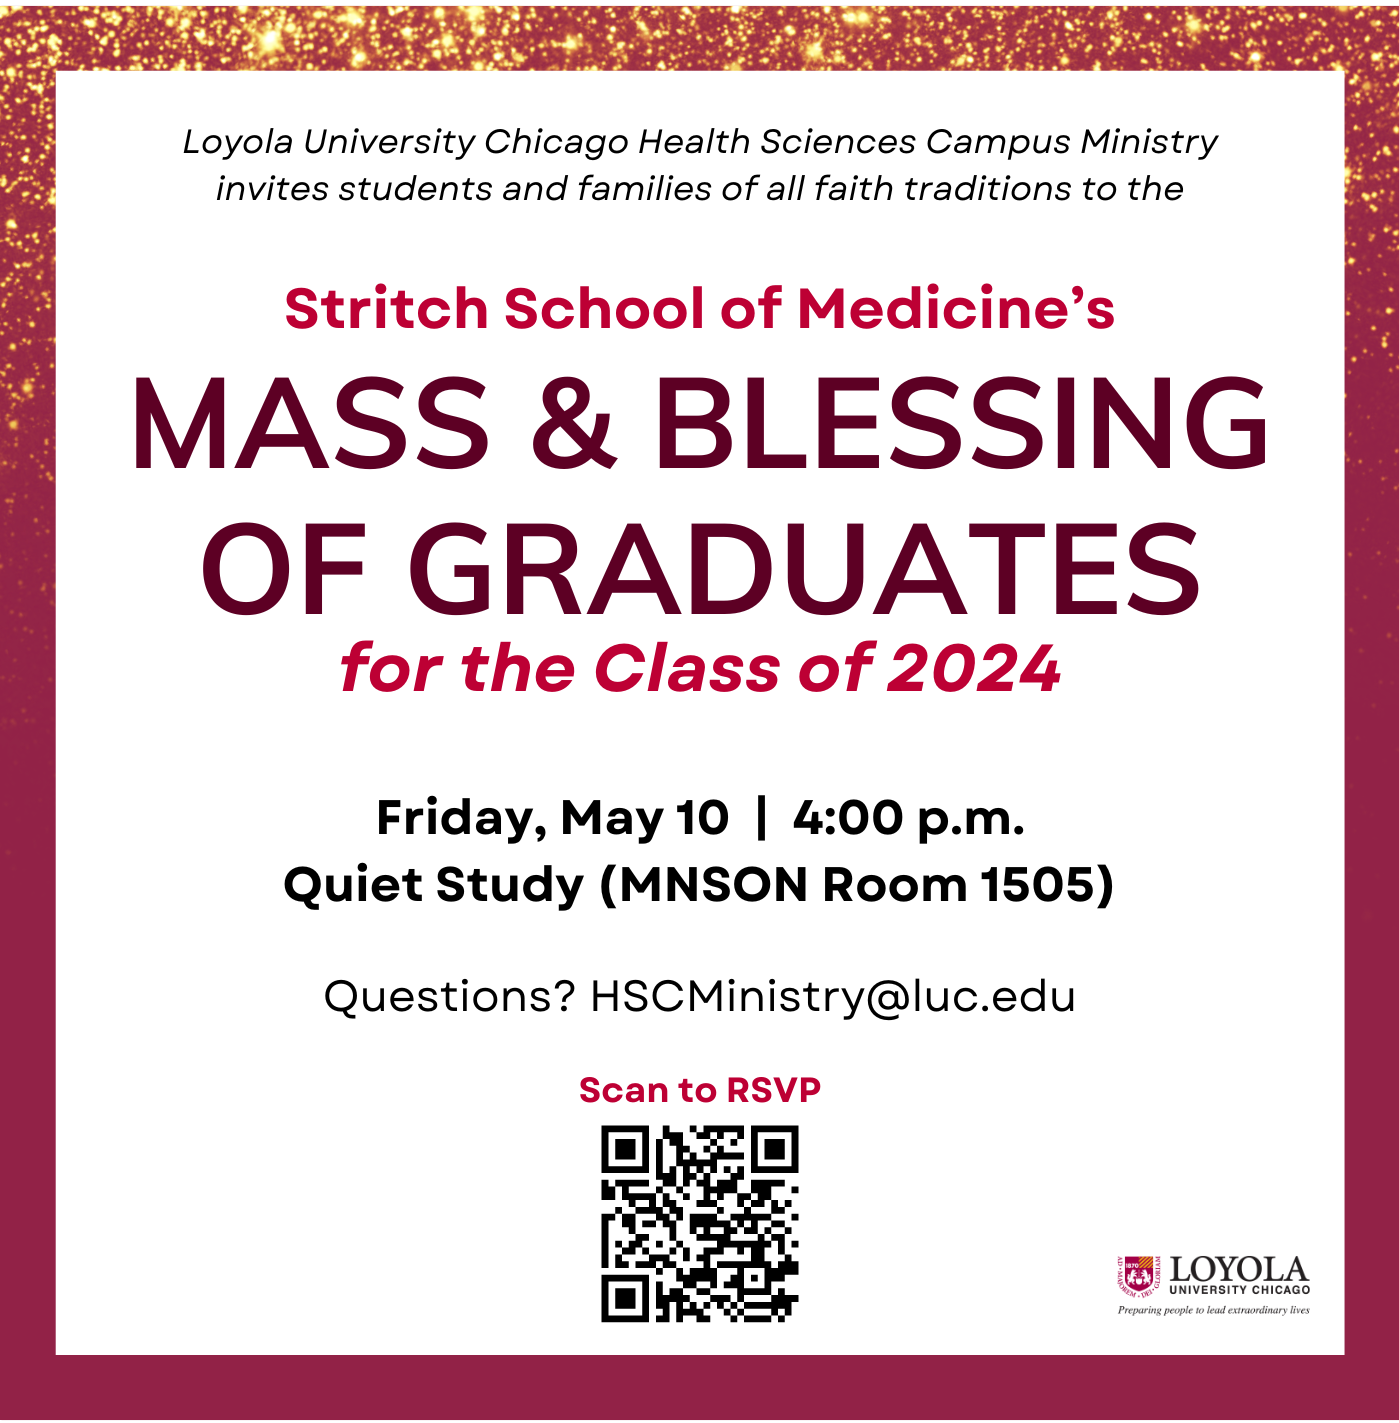 Flier for the SSOM Mass & Blessing of Graduates for the class of 2024. Taking place on Friday, May 10, at 4:00pm in the MNSON Quiet Study (room 1505).